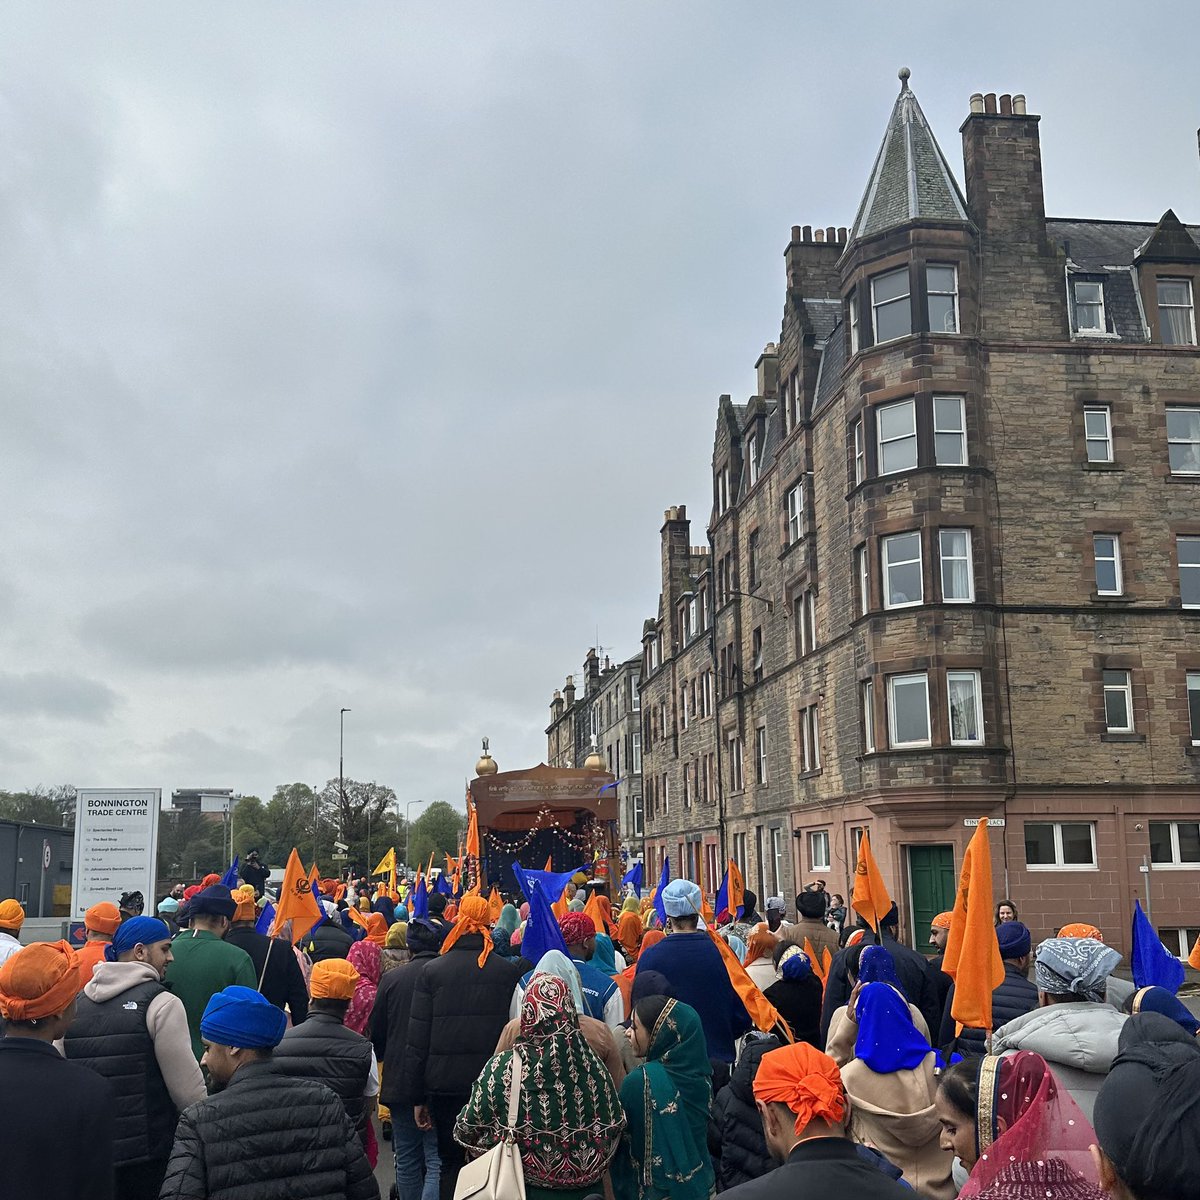 #Vaisakhi celebrations in #Leith today - together, #WeAreScotland. 🏴󠁧󠁢󠁳󠁣󠁴󠁿🧡